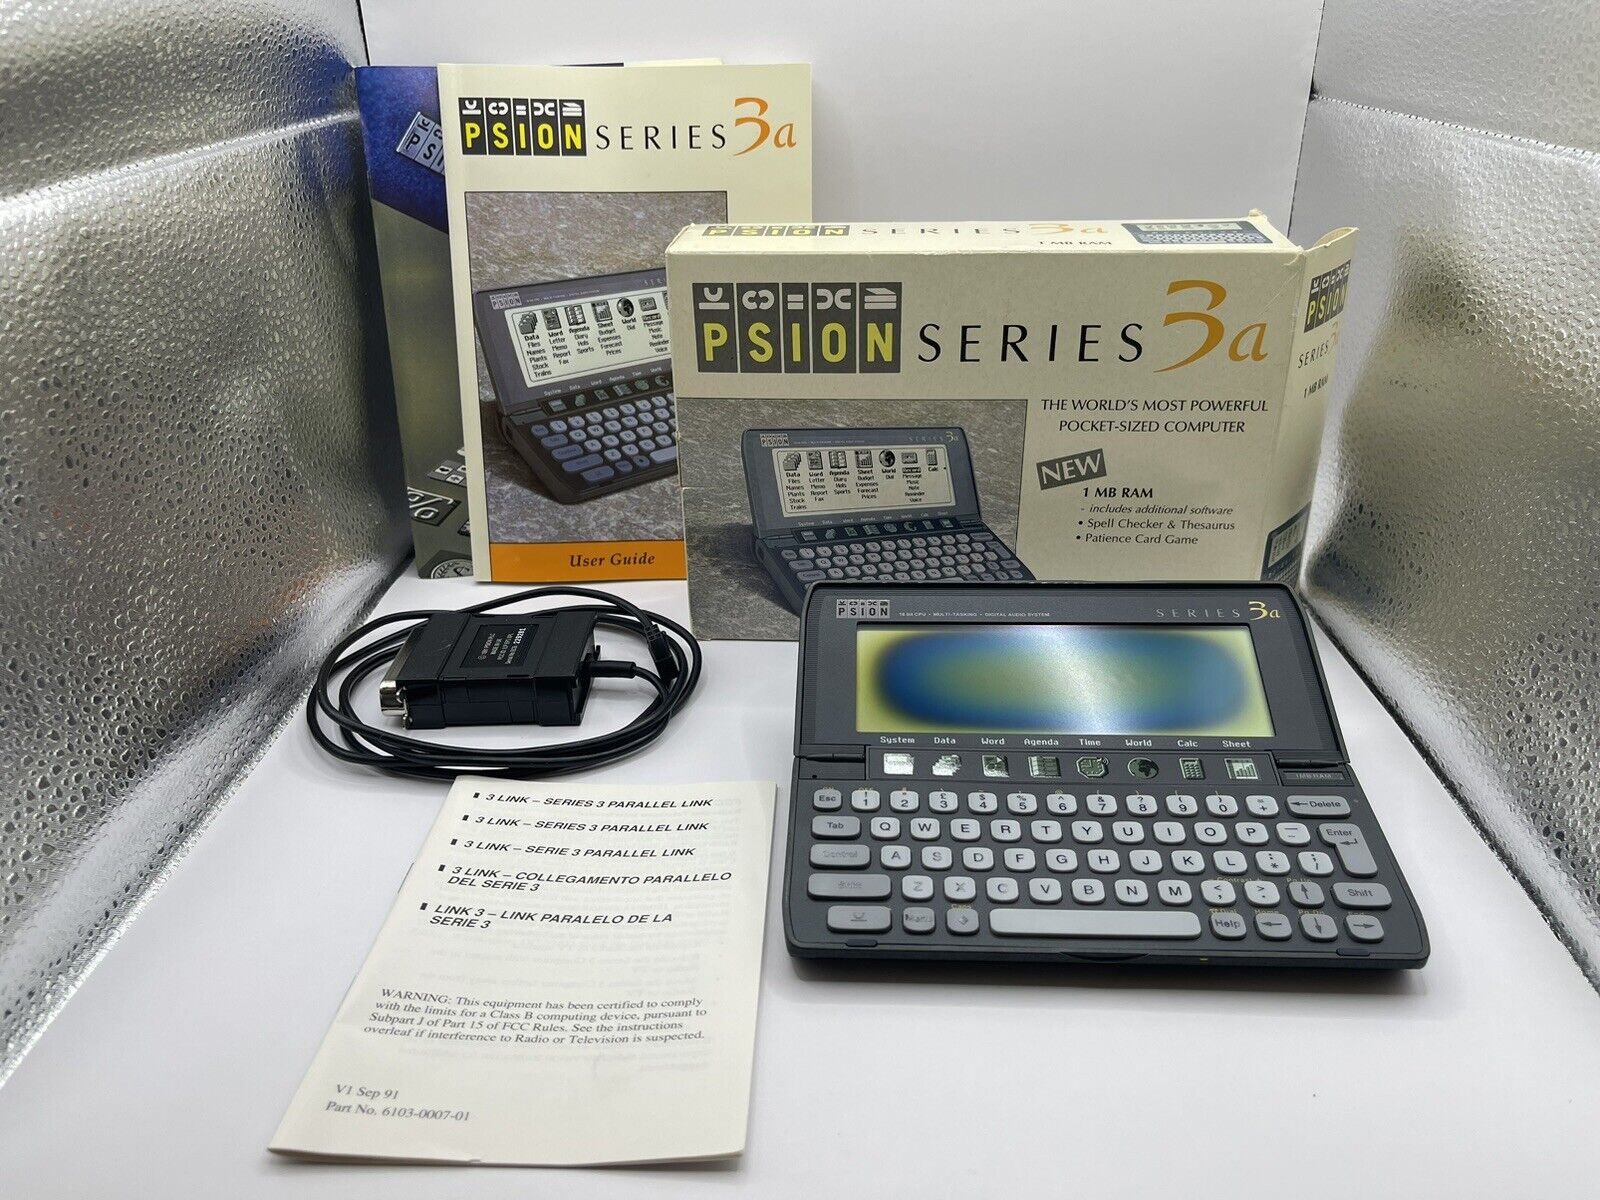 Vintage Psion Series 3a World’s Most Powerful Pocket-Sized Computer 1993